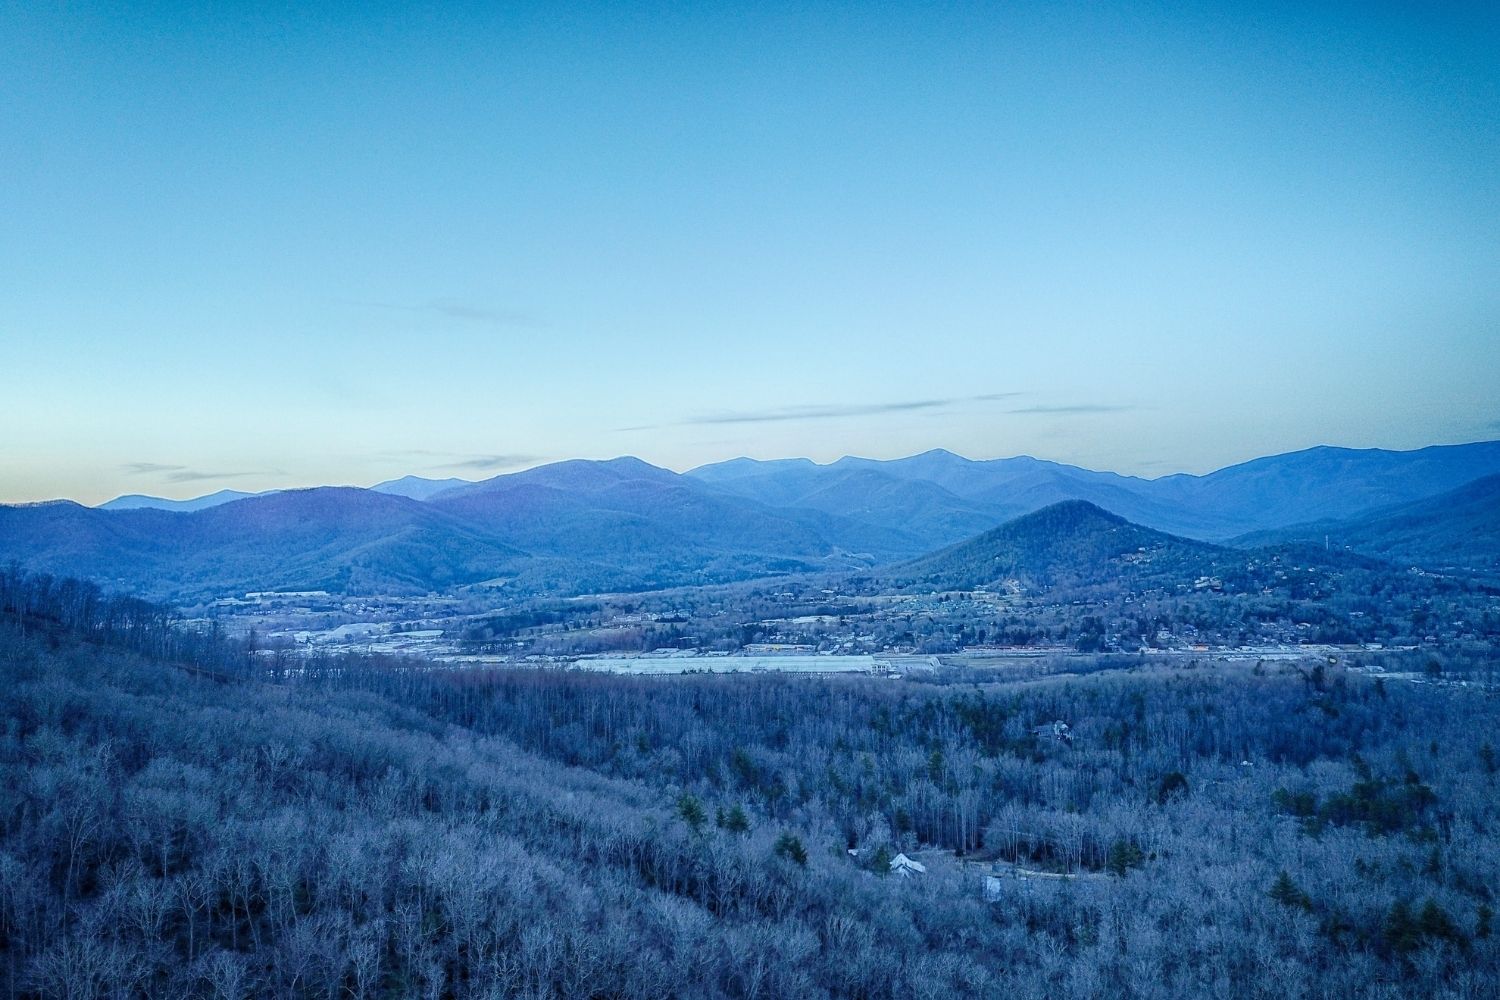 Things to do in Black Mountain NC